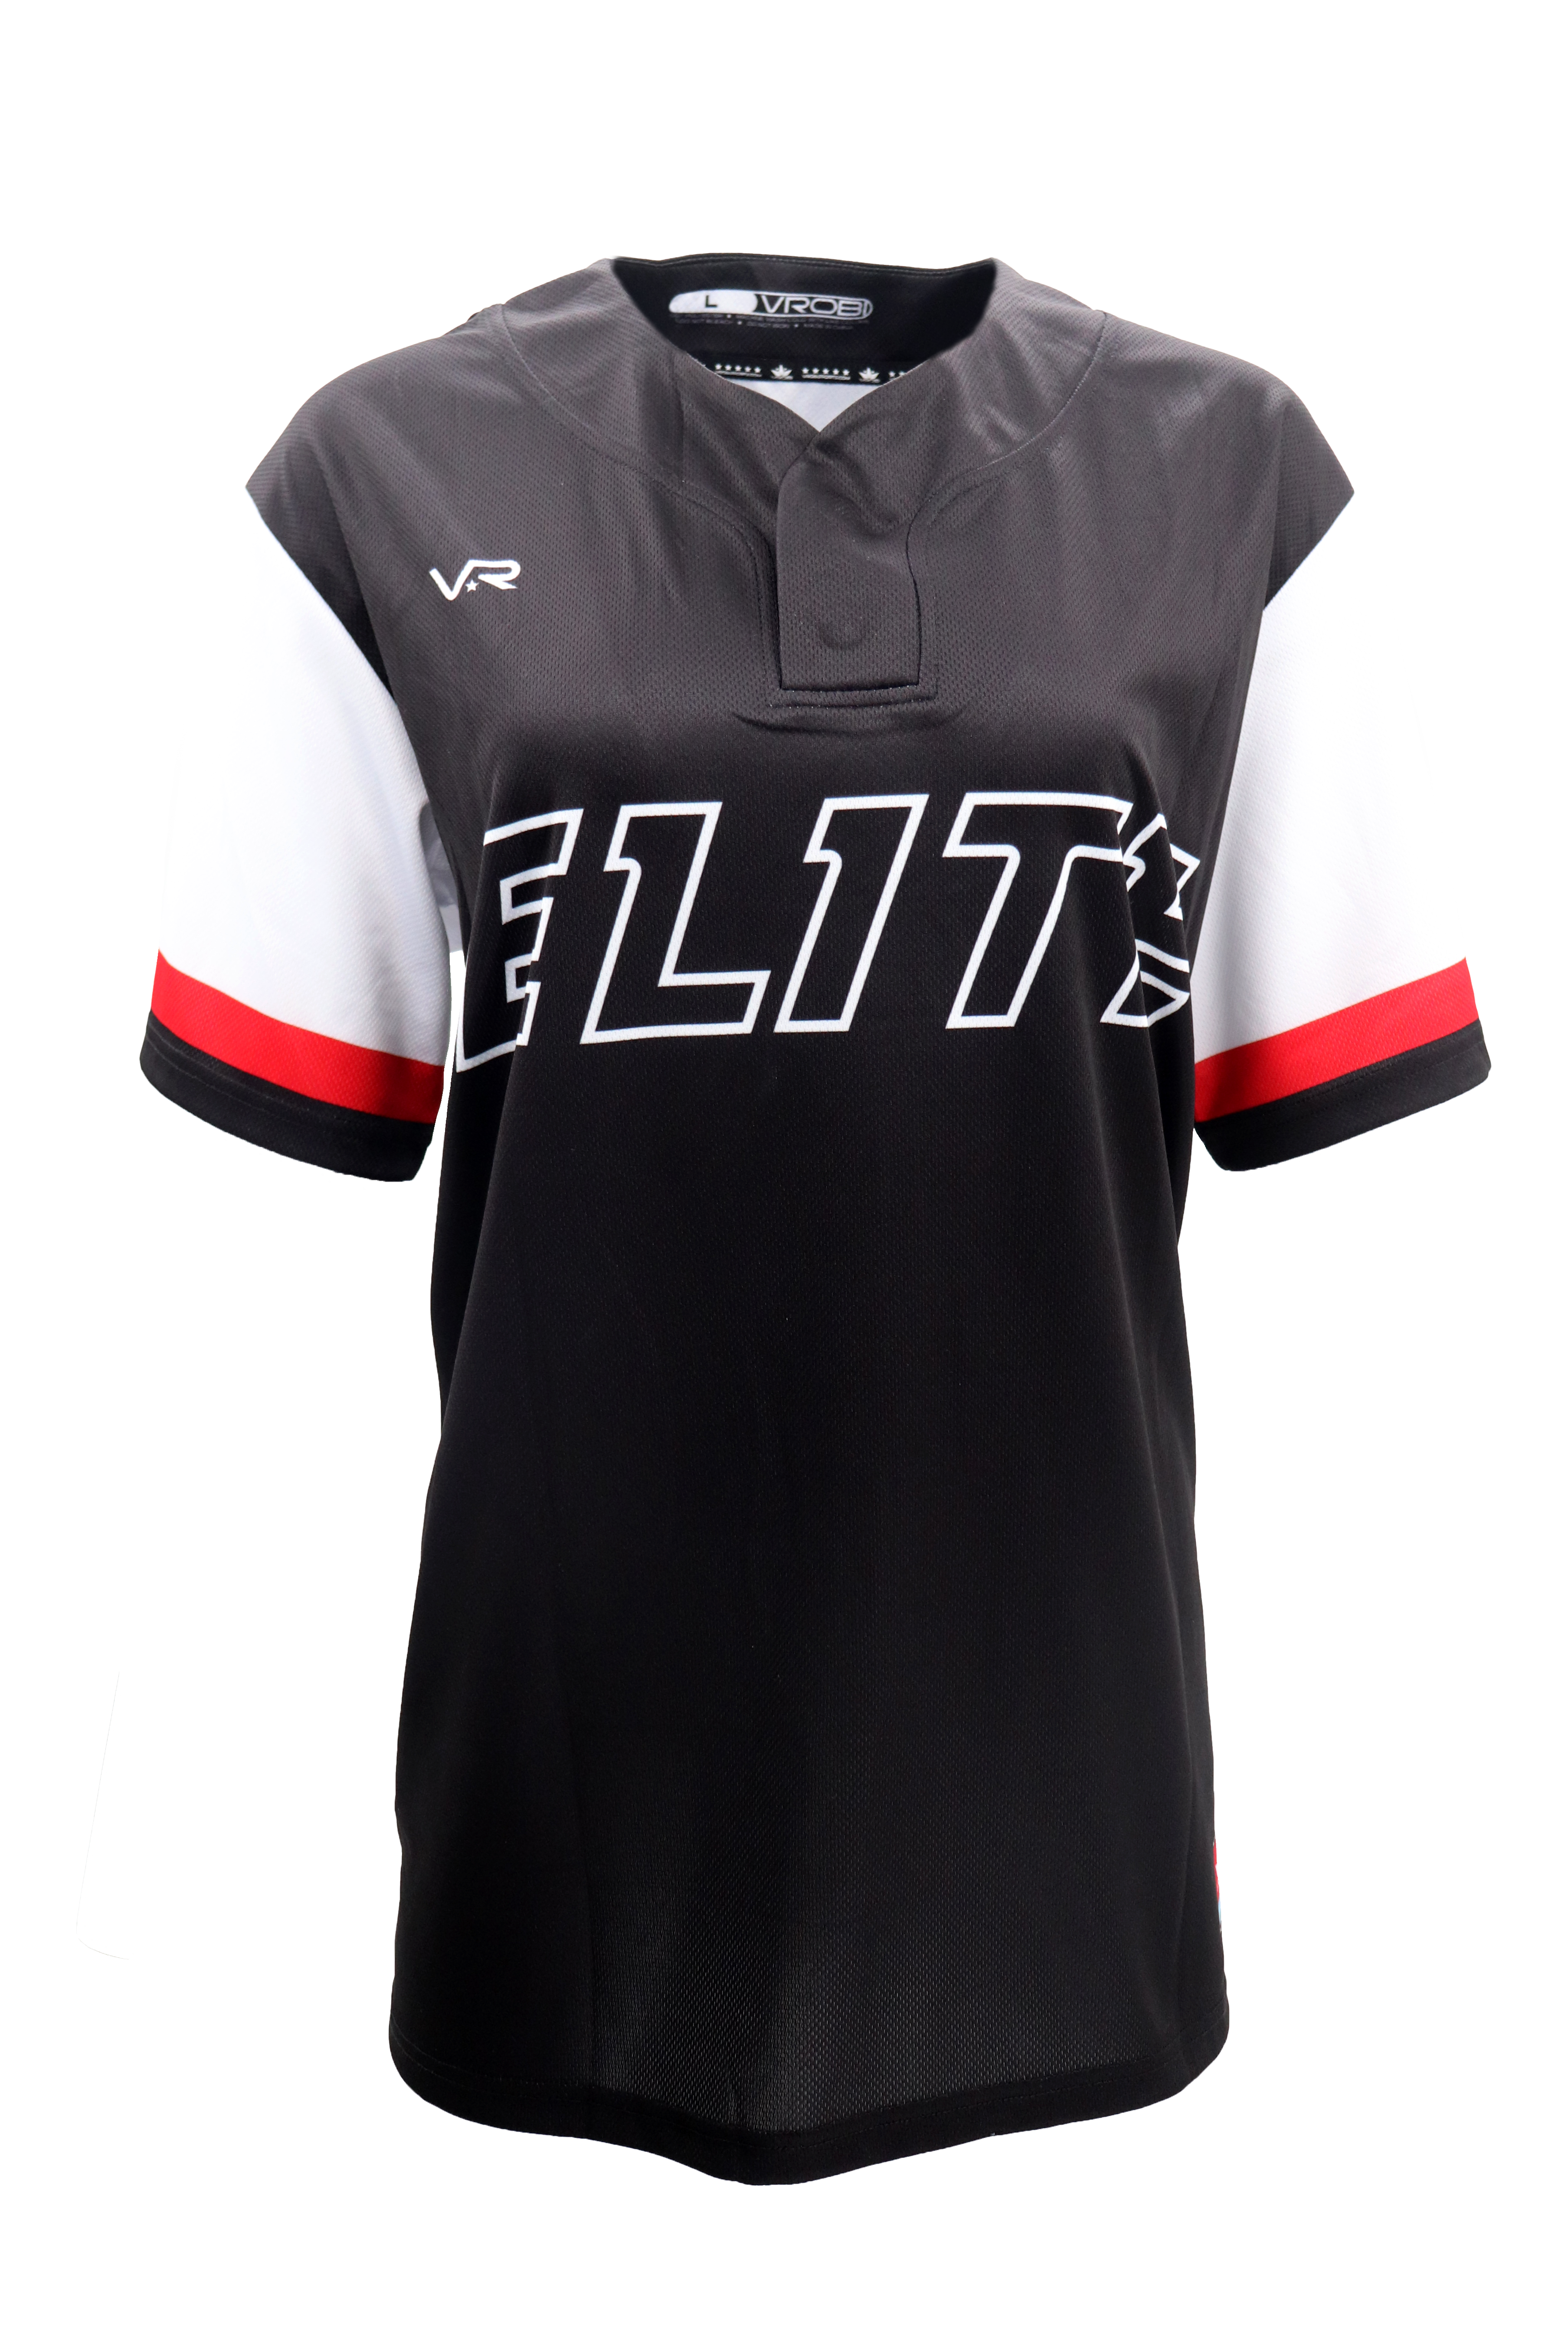 Full sub sublimated two button jerseys for baseball, fastpitch softball and  slowpitch softball